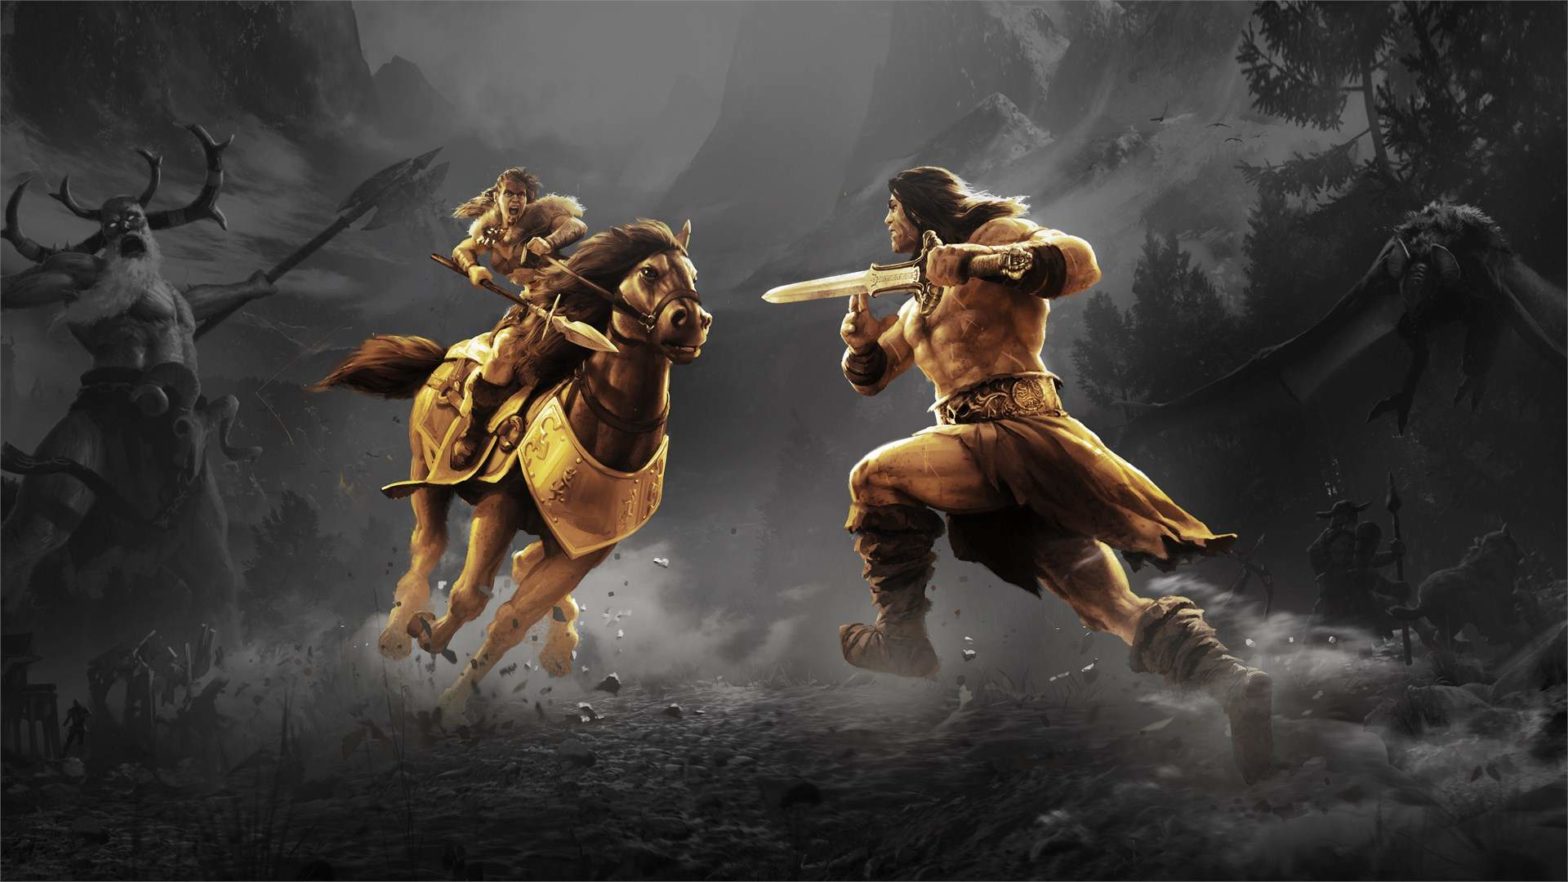 Conan Exiles – Complete Edition October 2021 Is Now Available For Windows 10, Xbox One, And Xbox Series X|S